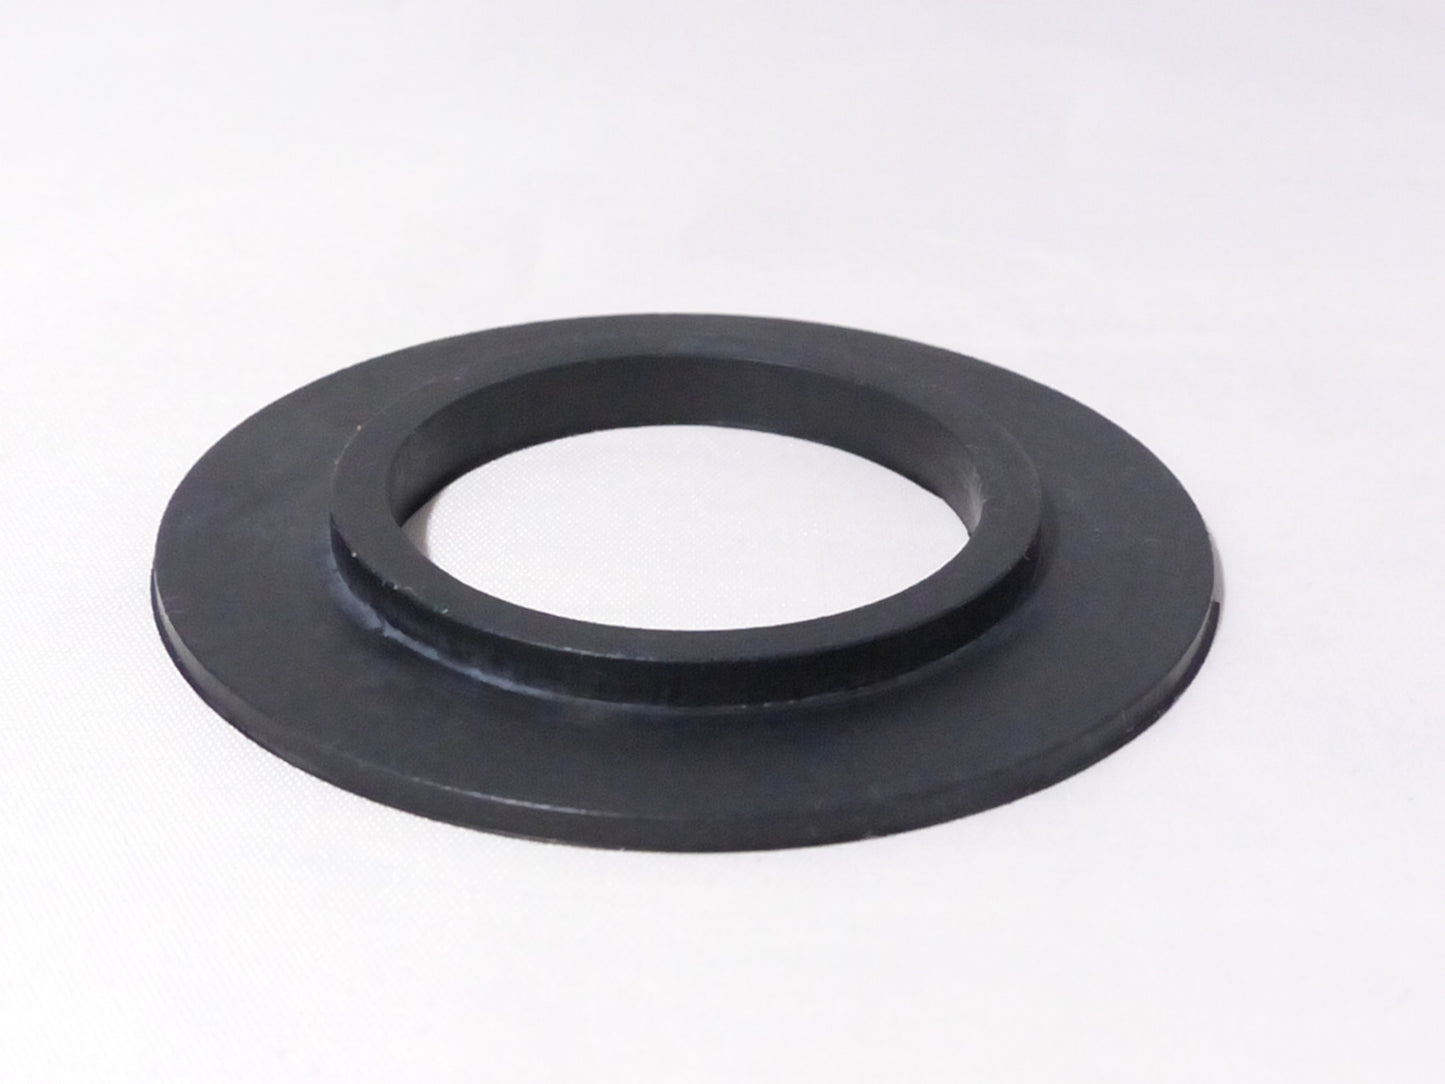 High pressure rubber seal for hydraulic ram from fuxus original